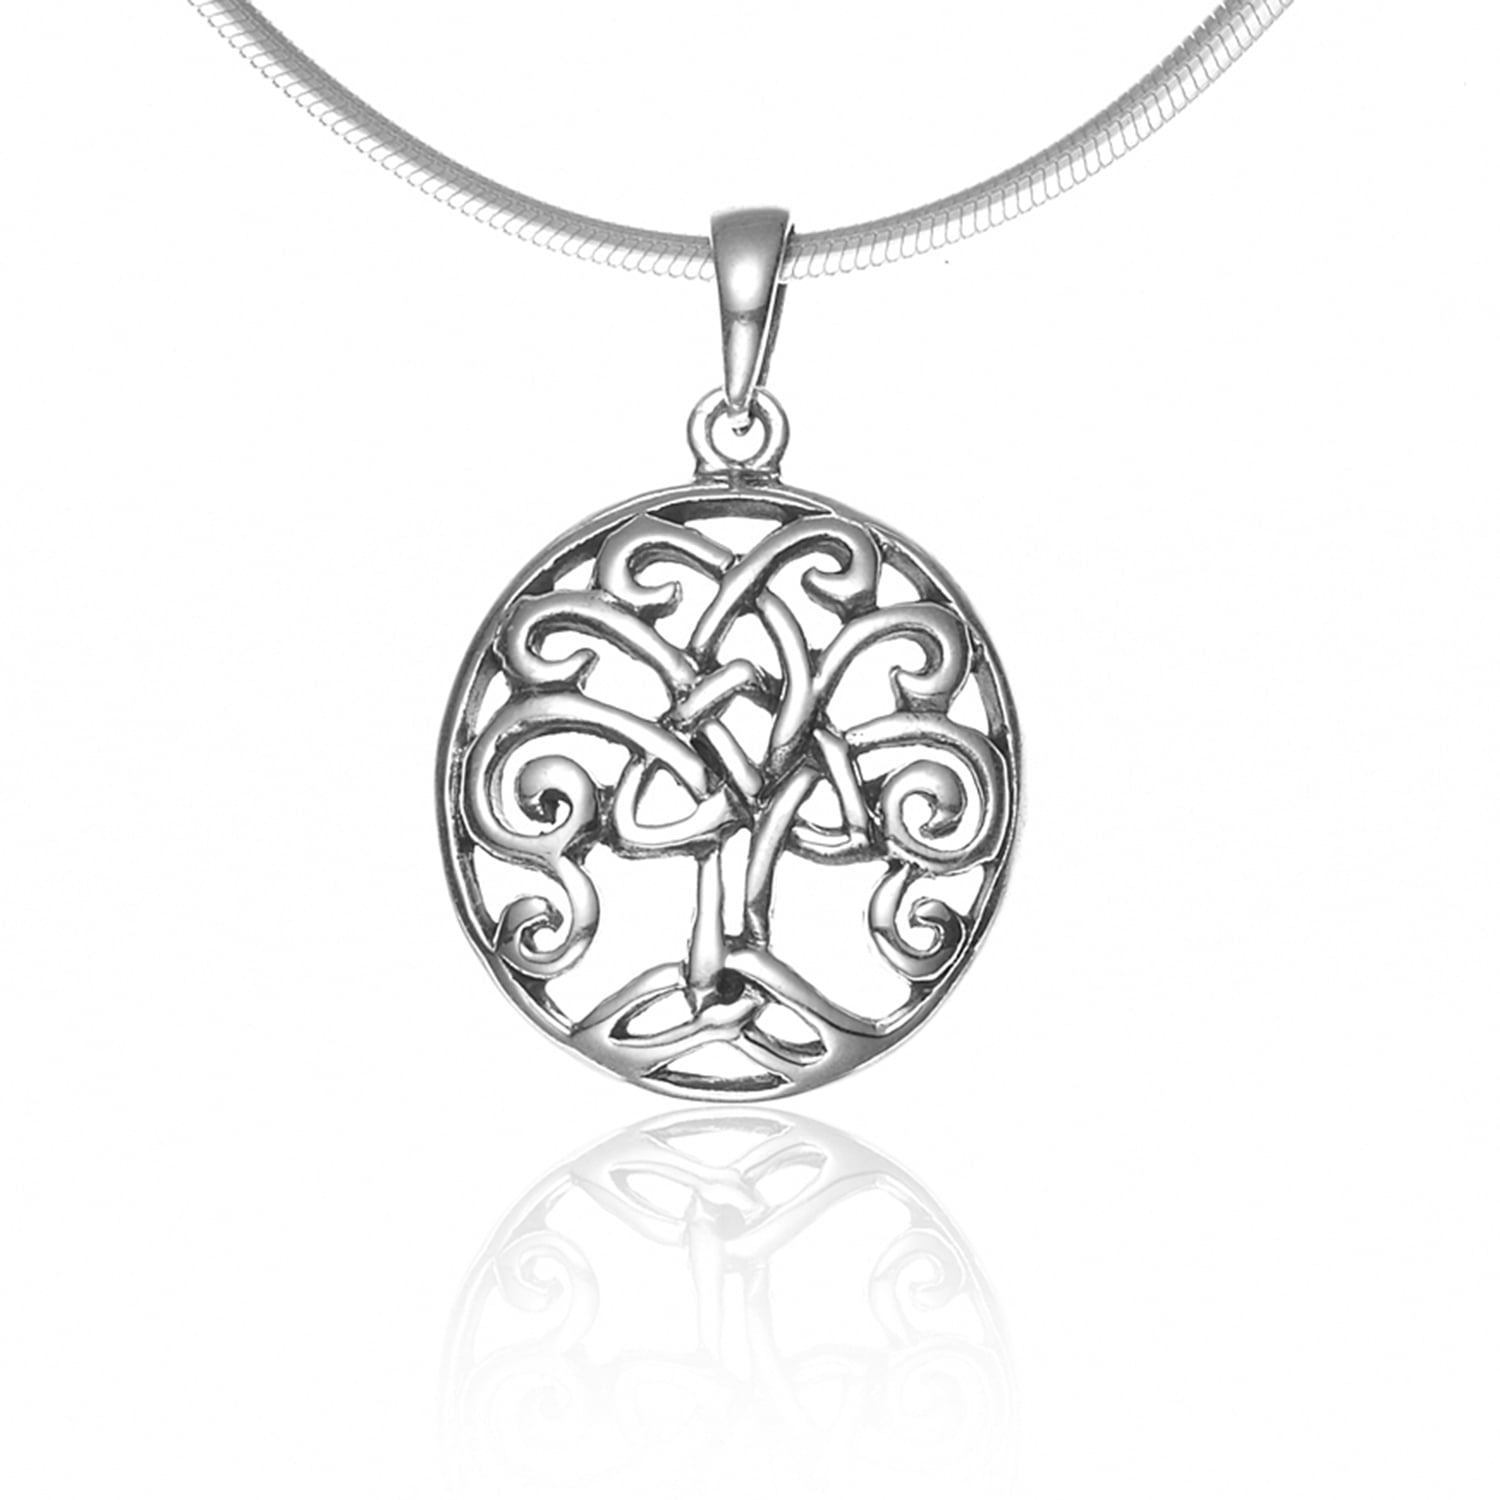 PENDANT 925 STERLING SILVER CELTIC TRINITY KNOT NECKLACE,18 INCH,FROM IRELAND 